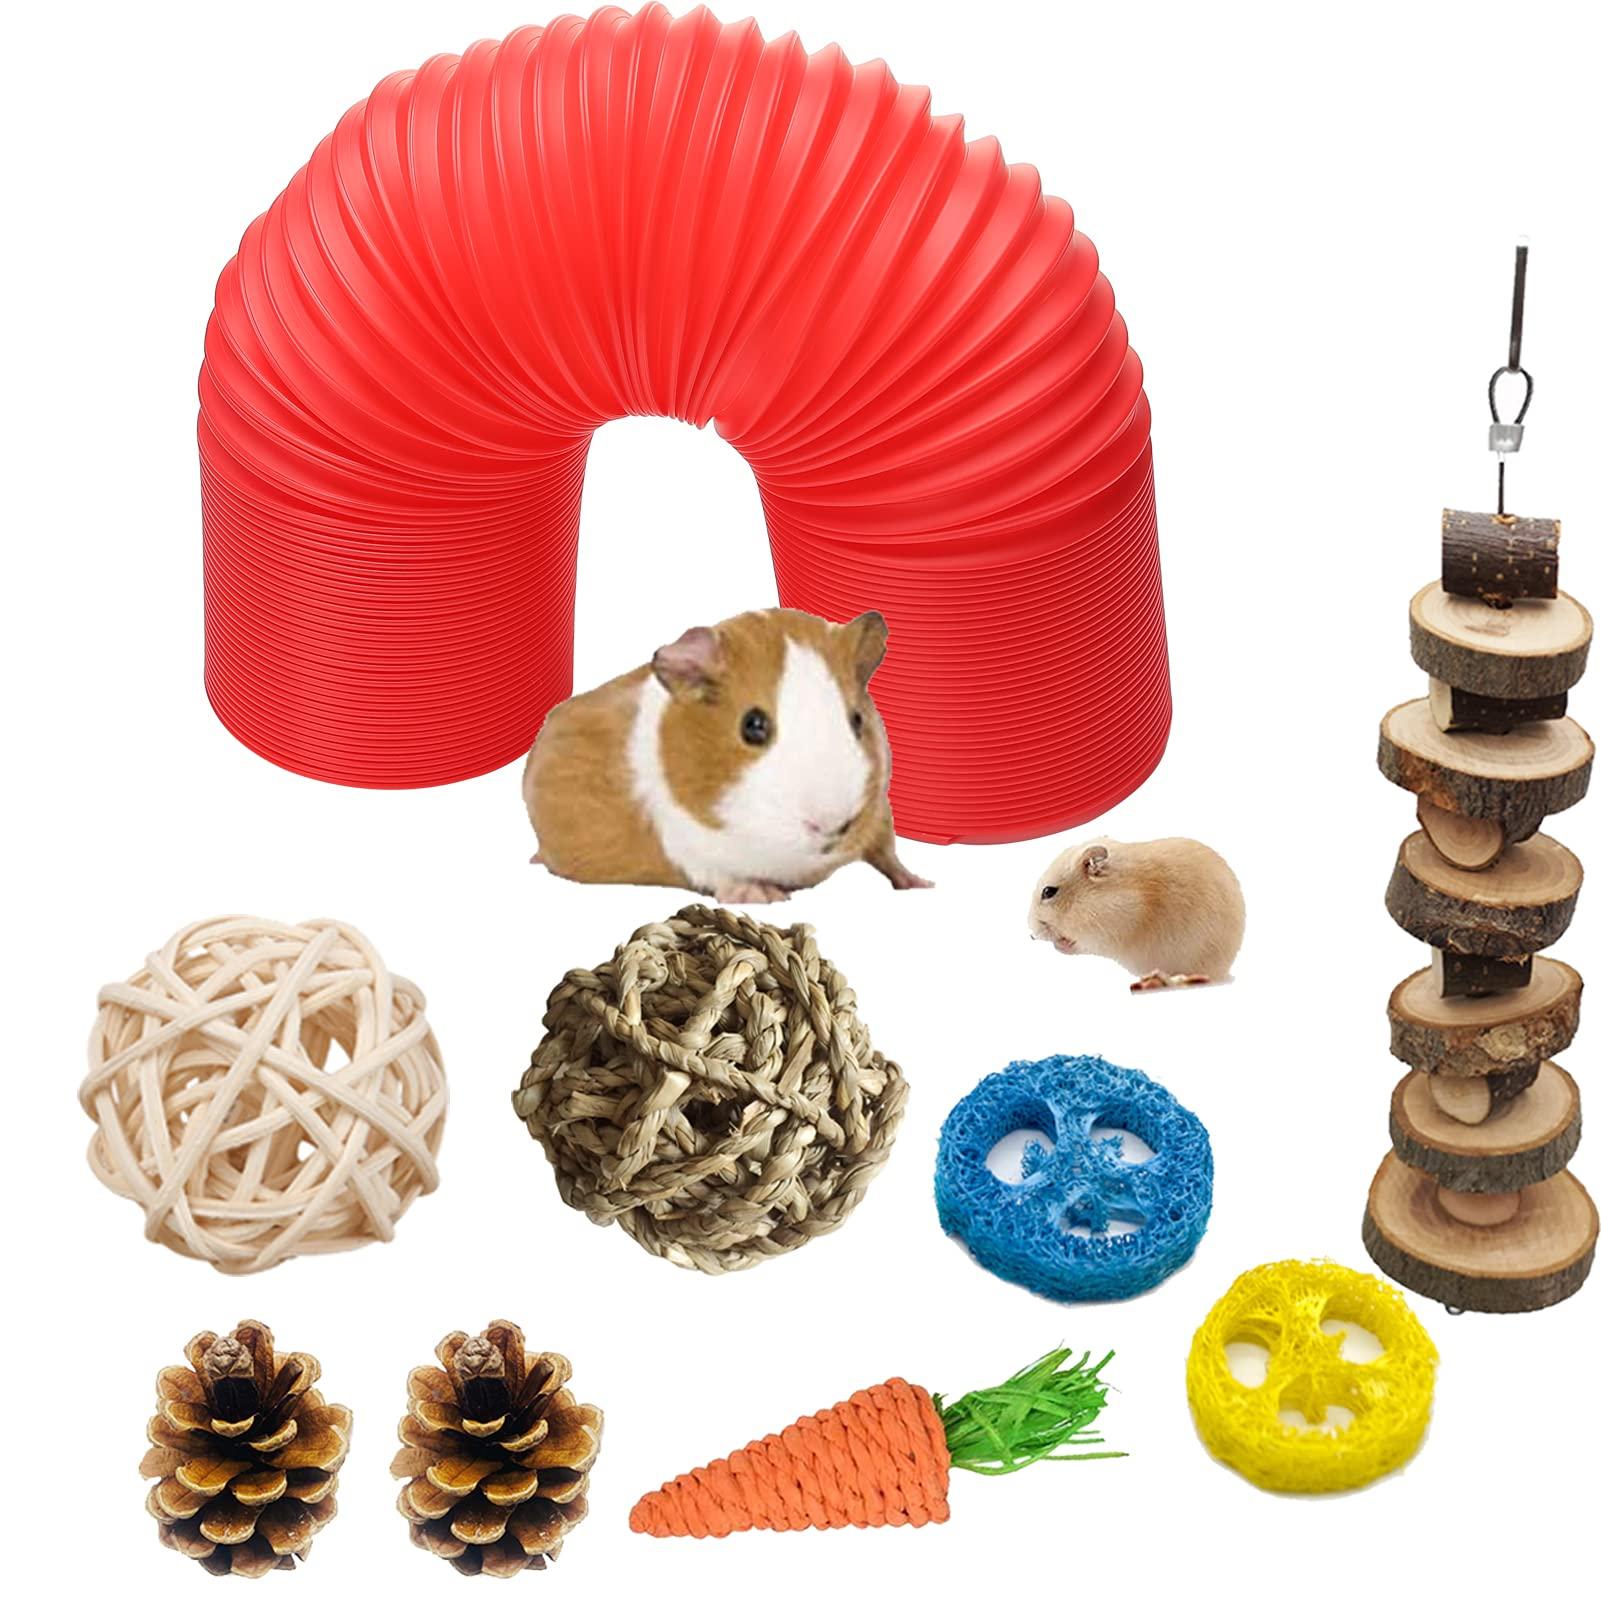 Hamster Fun Tunnel Pet Mouse Plastic Tube Toys Small Animal Foldable Exercising Training Hideout Tunnels with cute pet Toys for guinea Pigs,gerbils,Rats,Mice,Ferrets and Other Small Animals (RED)